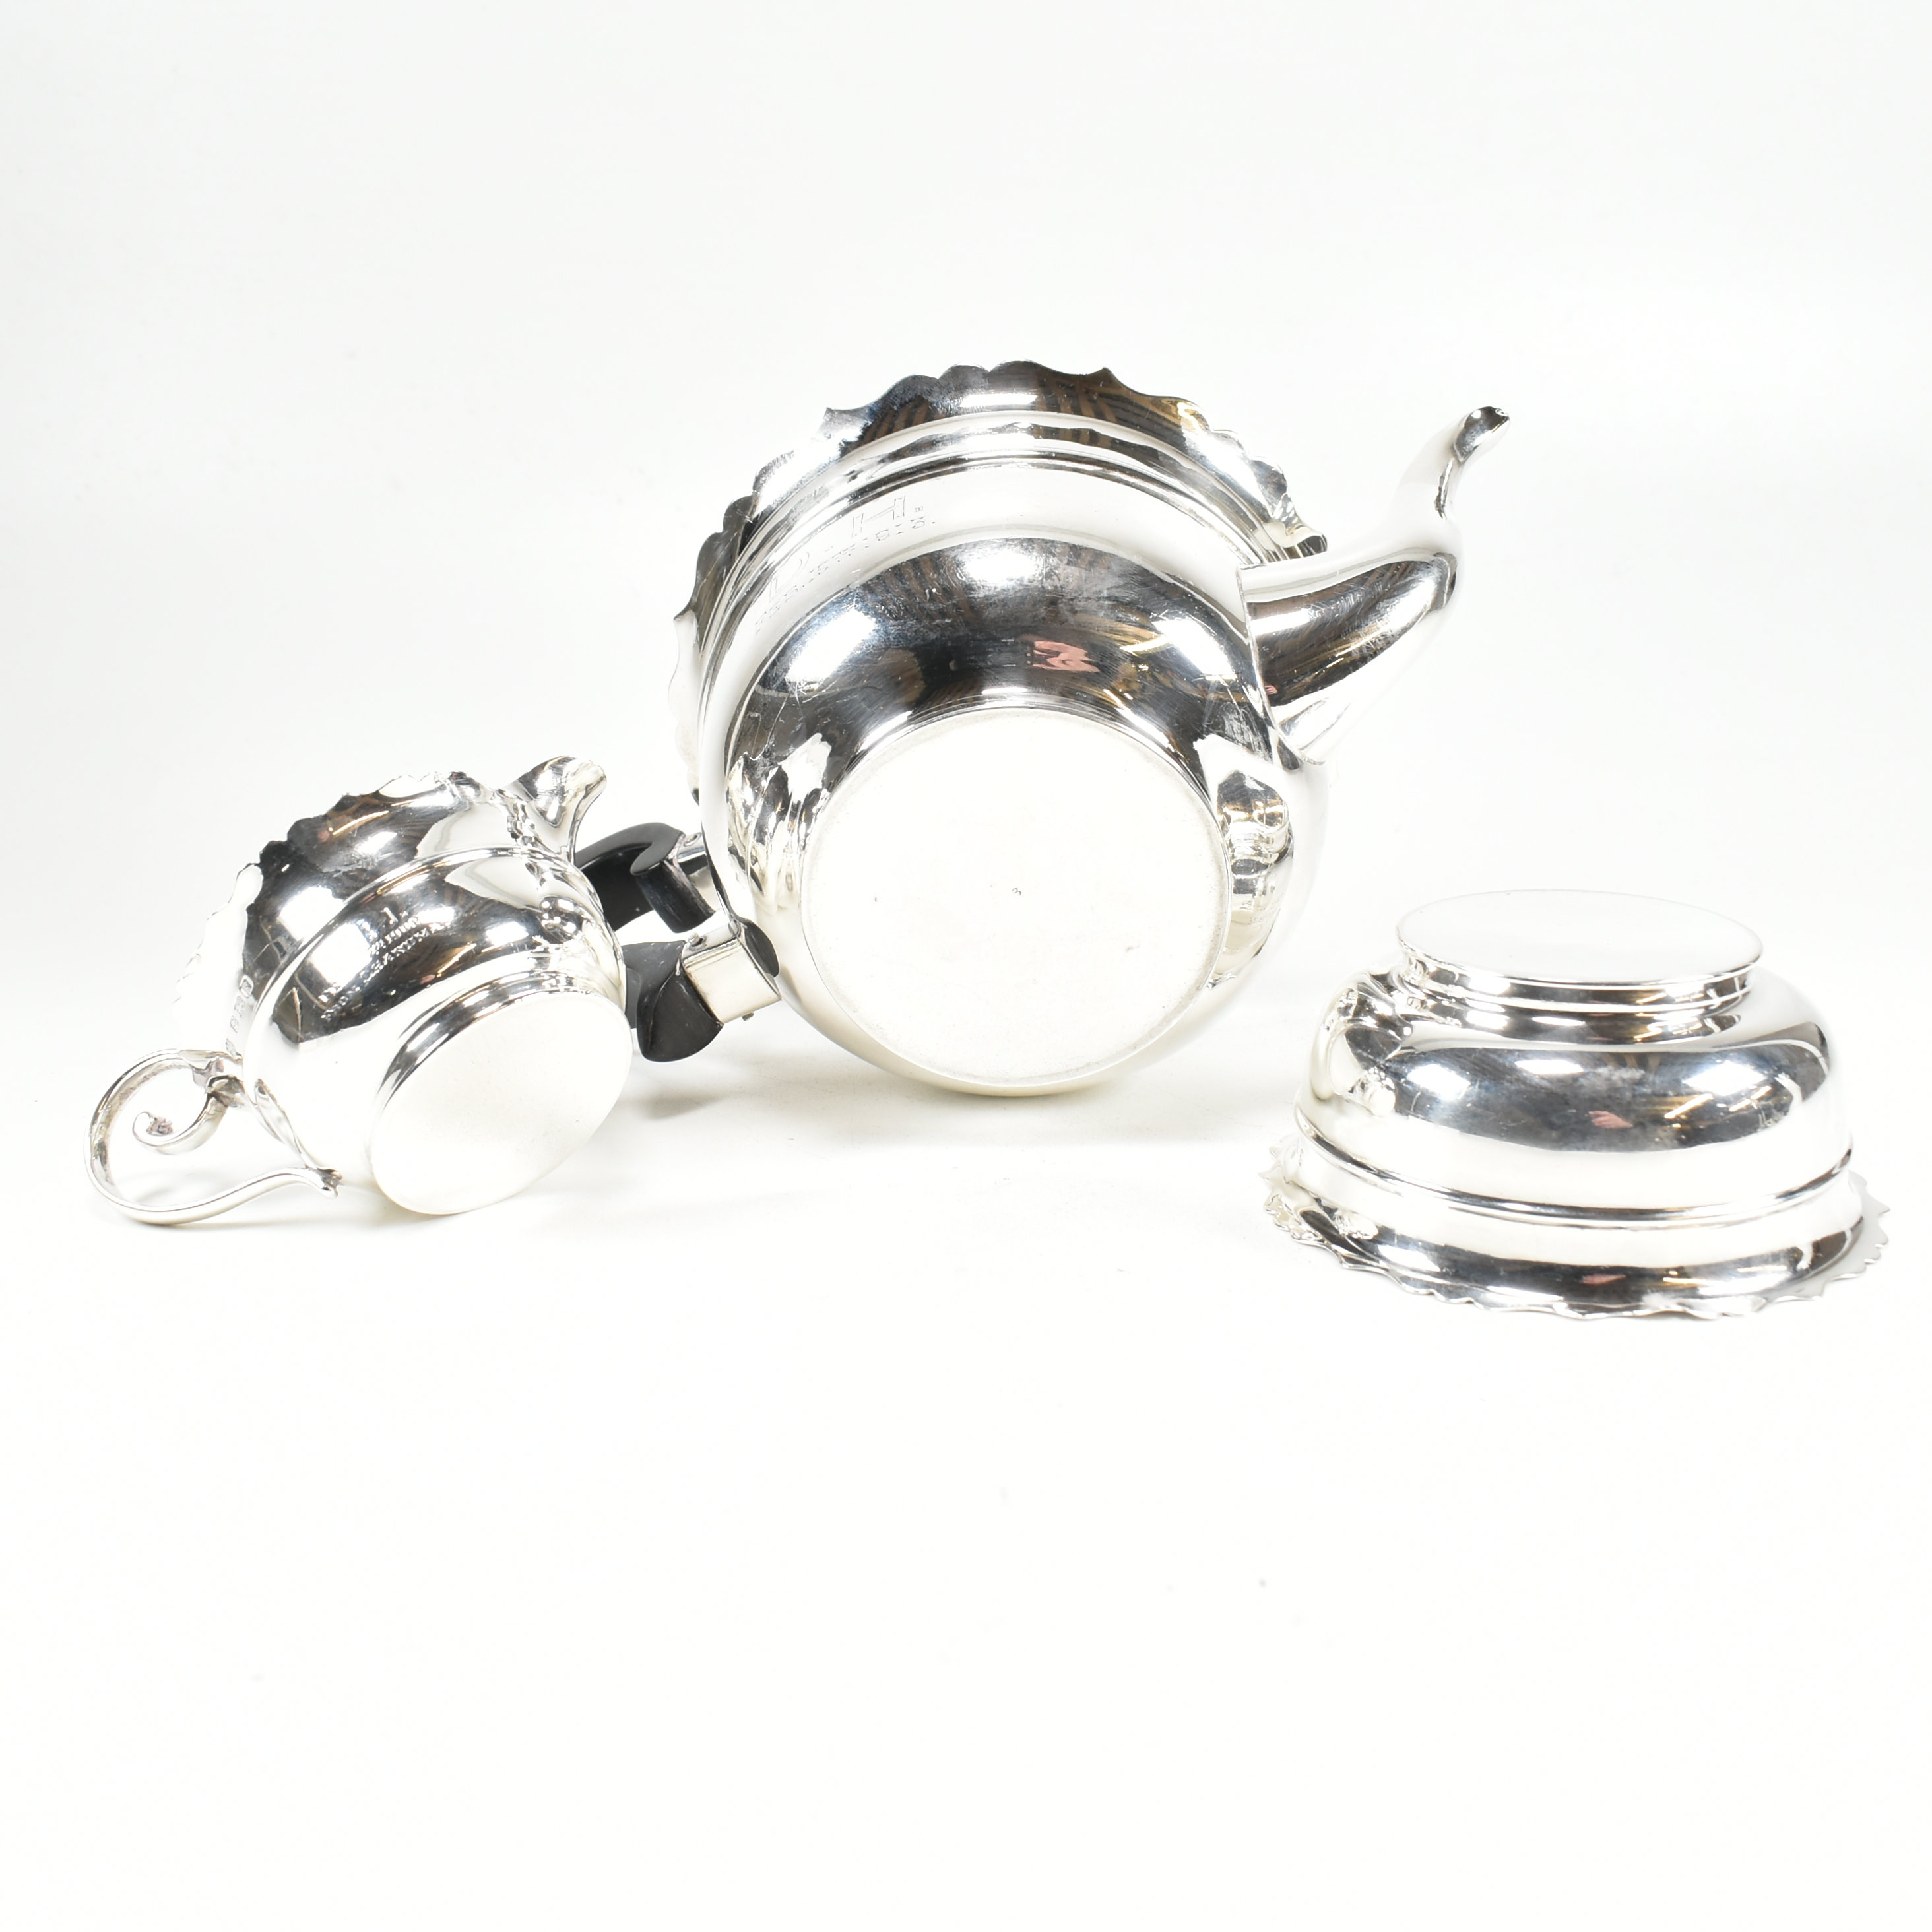 EARLY 20TH CENTURY HALLMARKED SILVER TEA SERVICE - Image 6 of 9